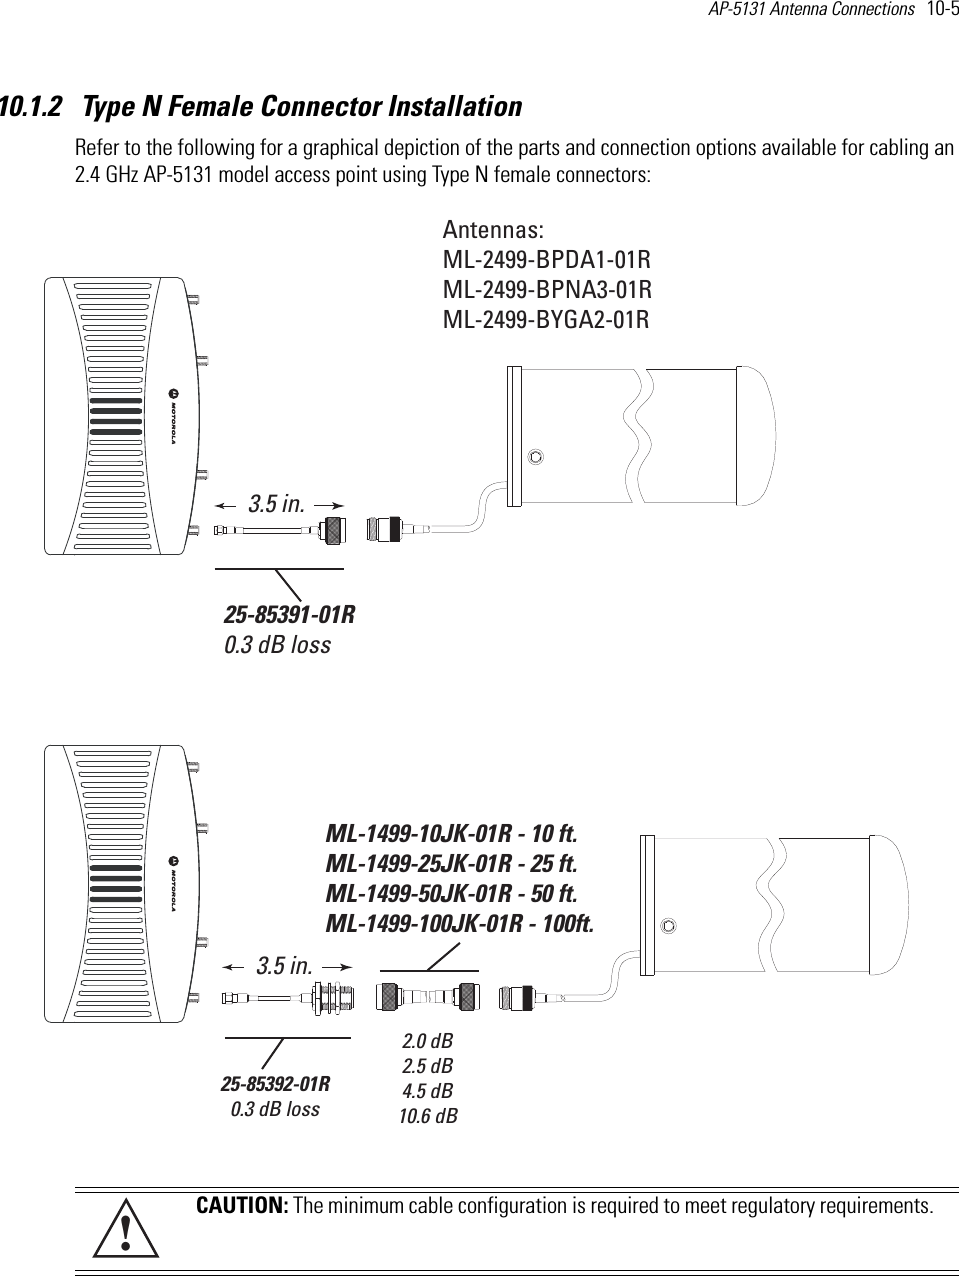 AP-5131 Antenna Connections   10-5 10.1.2  Type N Female Connector InstallationRefer to the following for a graphical depiction of the parts and connection options available for cabling an 2.4 GHz AP-5131 model access point using Type N female connectors: CAUTION: The minimum cable configuration is required to meet regulatory requirements.Antennas:ML-2499-BPDA1-01RML-2499-BPNA3-01RML-2499-BYGA2-01R25-85392-01R0.3 dB loss3.5 in.ML-1499-10JK-01R - 10 ft.ML-1499-25JK-01R - 25 ft.ML-1499-50JK-01R - 50 ft.ML-1499-100JK-01R - 100ft. 2.0 dB2.5 dB4.5 dB10.6 dB25-85391-01R0.3 dB loss3.5 in.!!